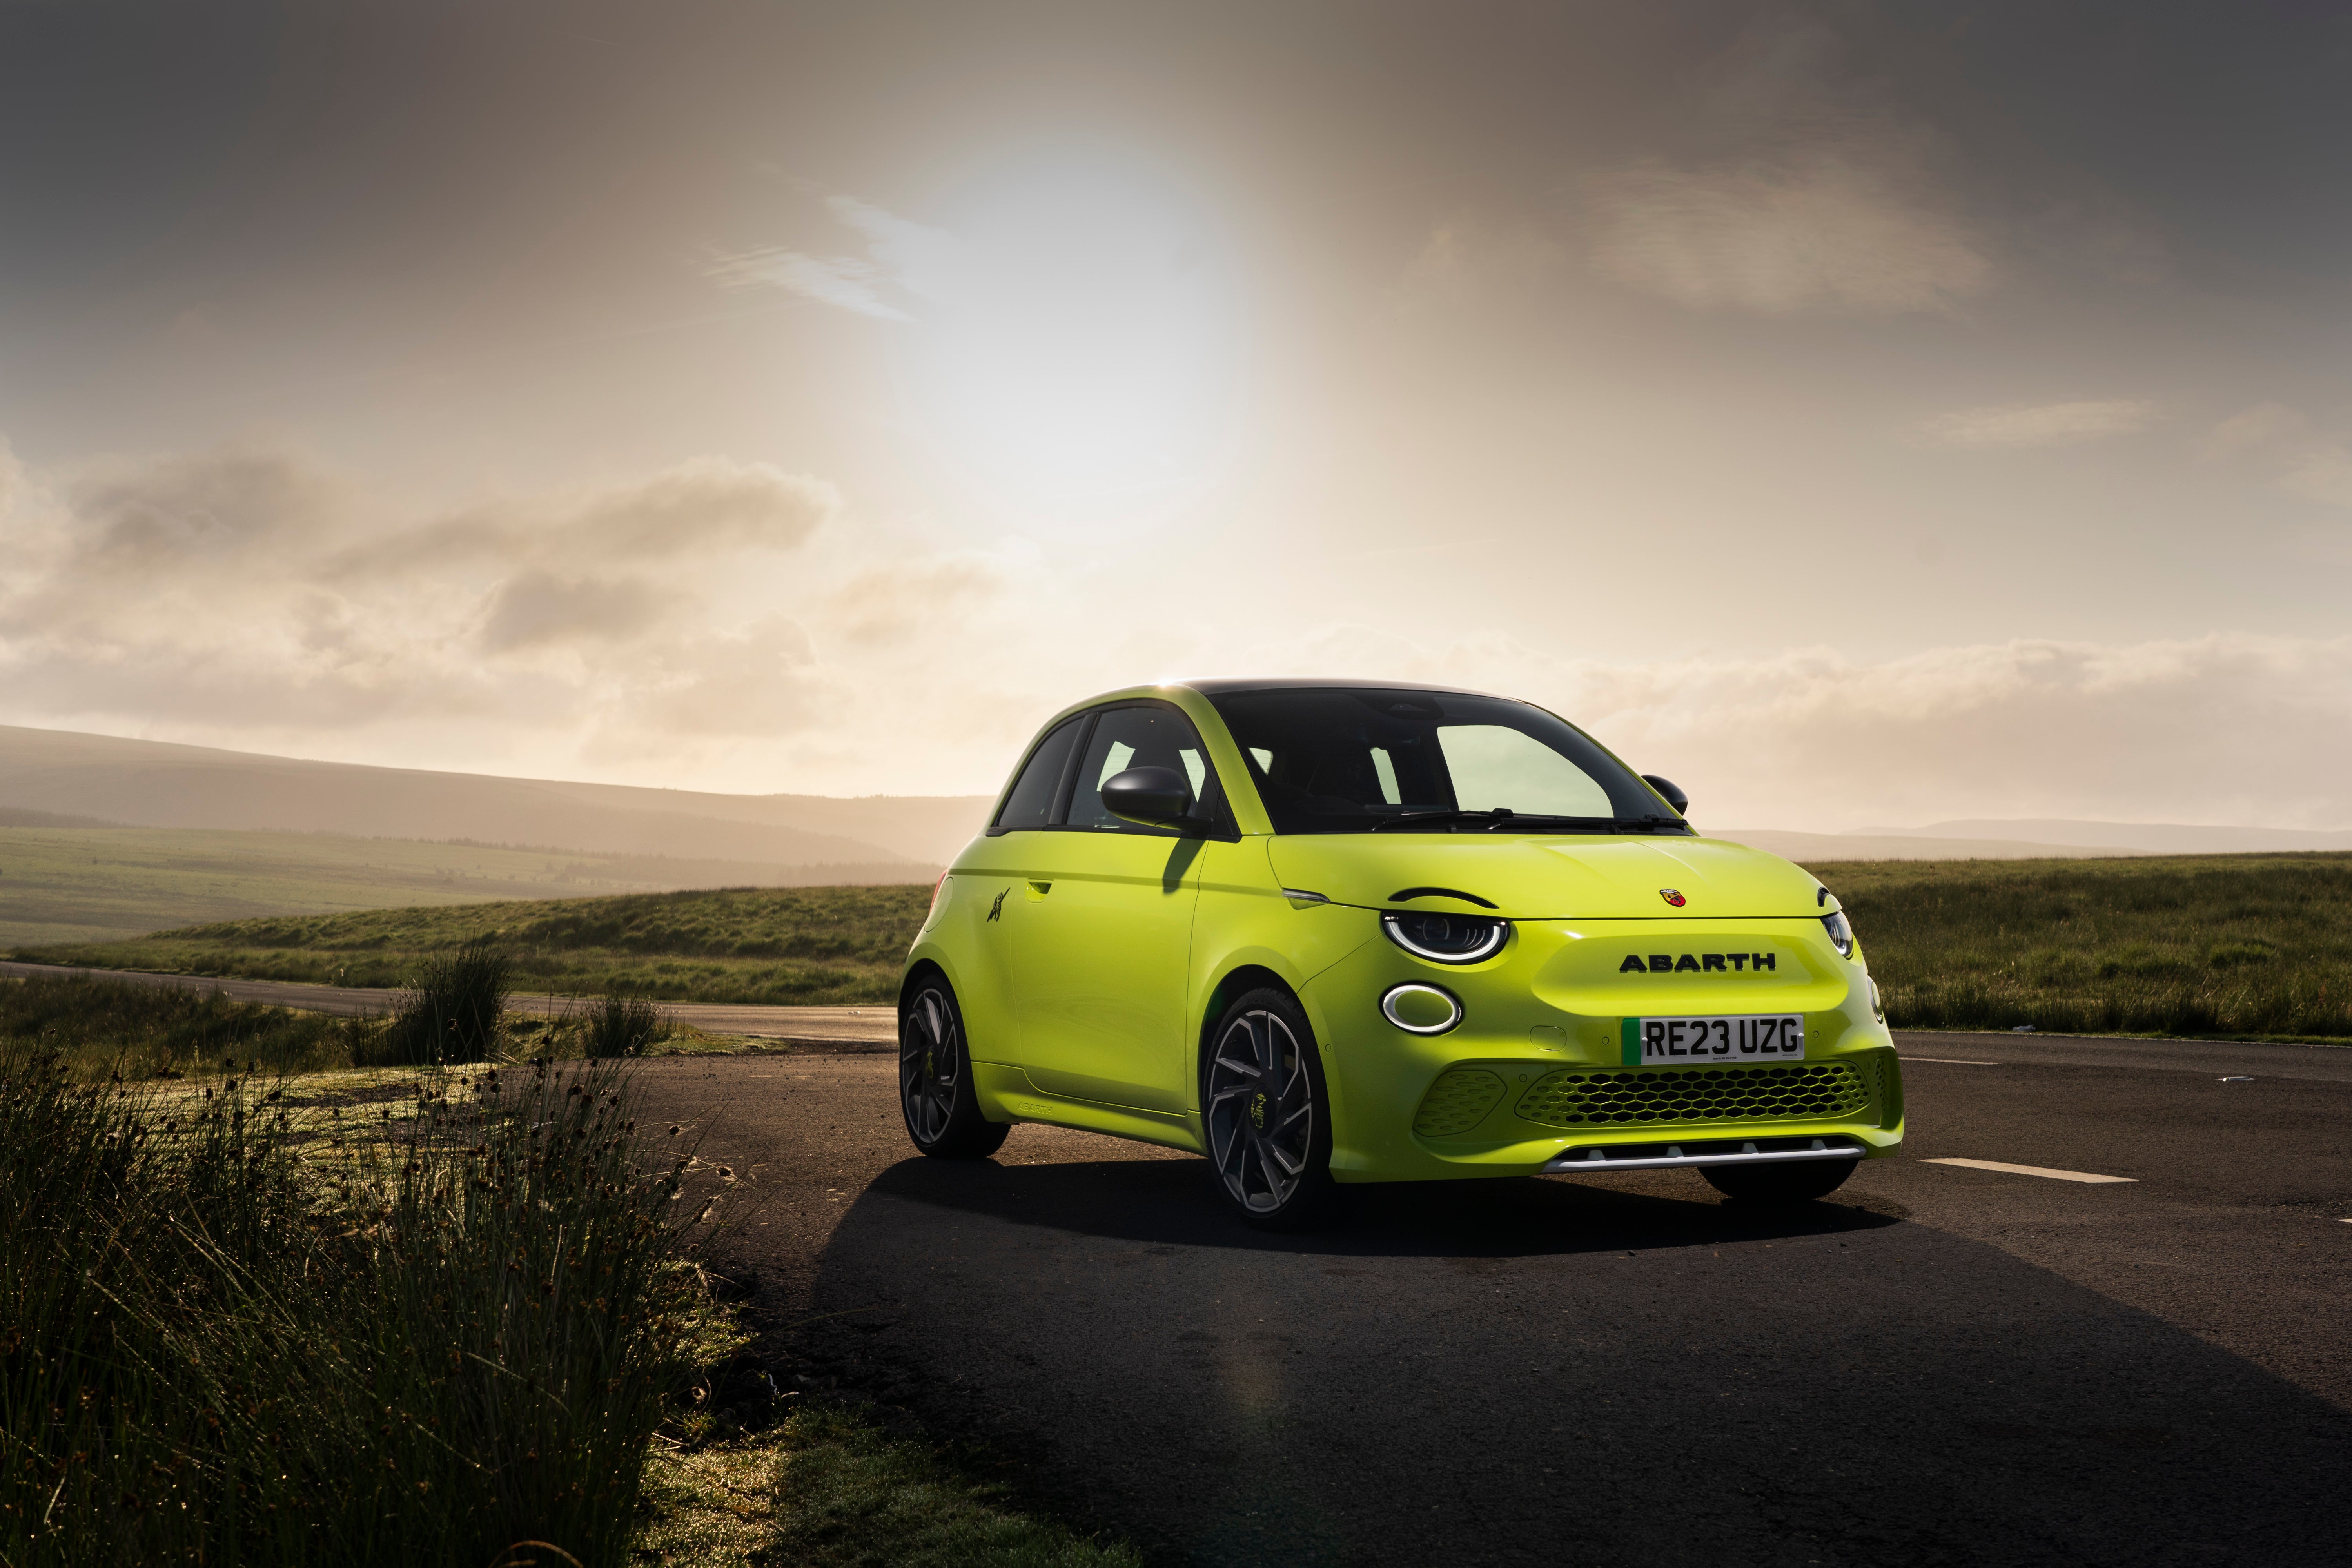 Not a car for the bashful: the Abarth 500e in its ‘Acid Green’ paintwork